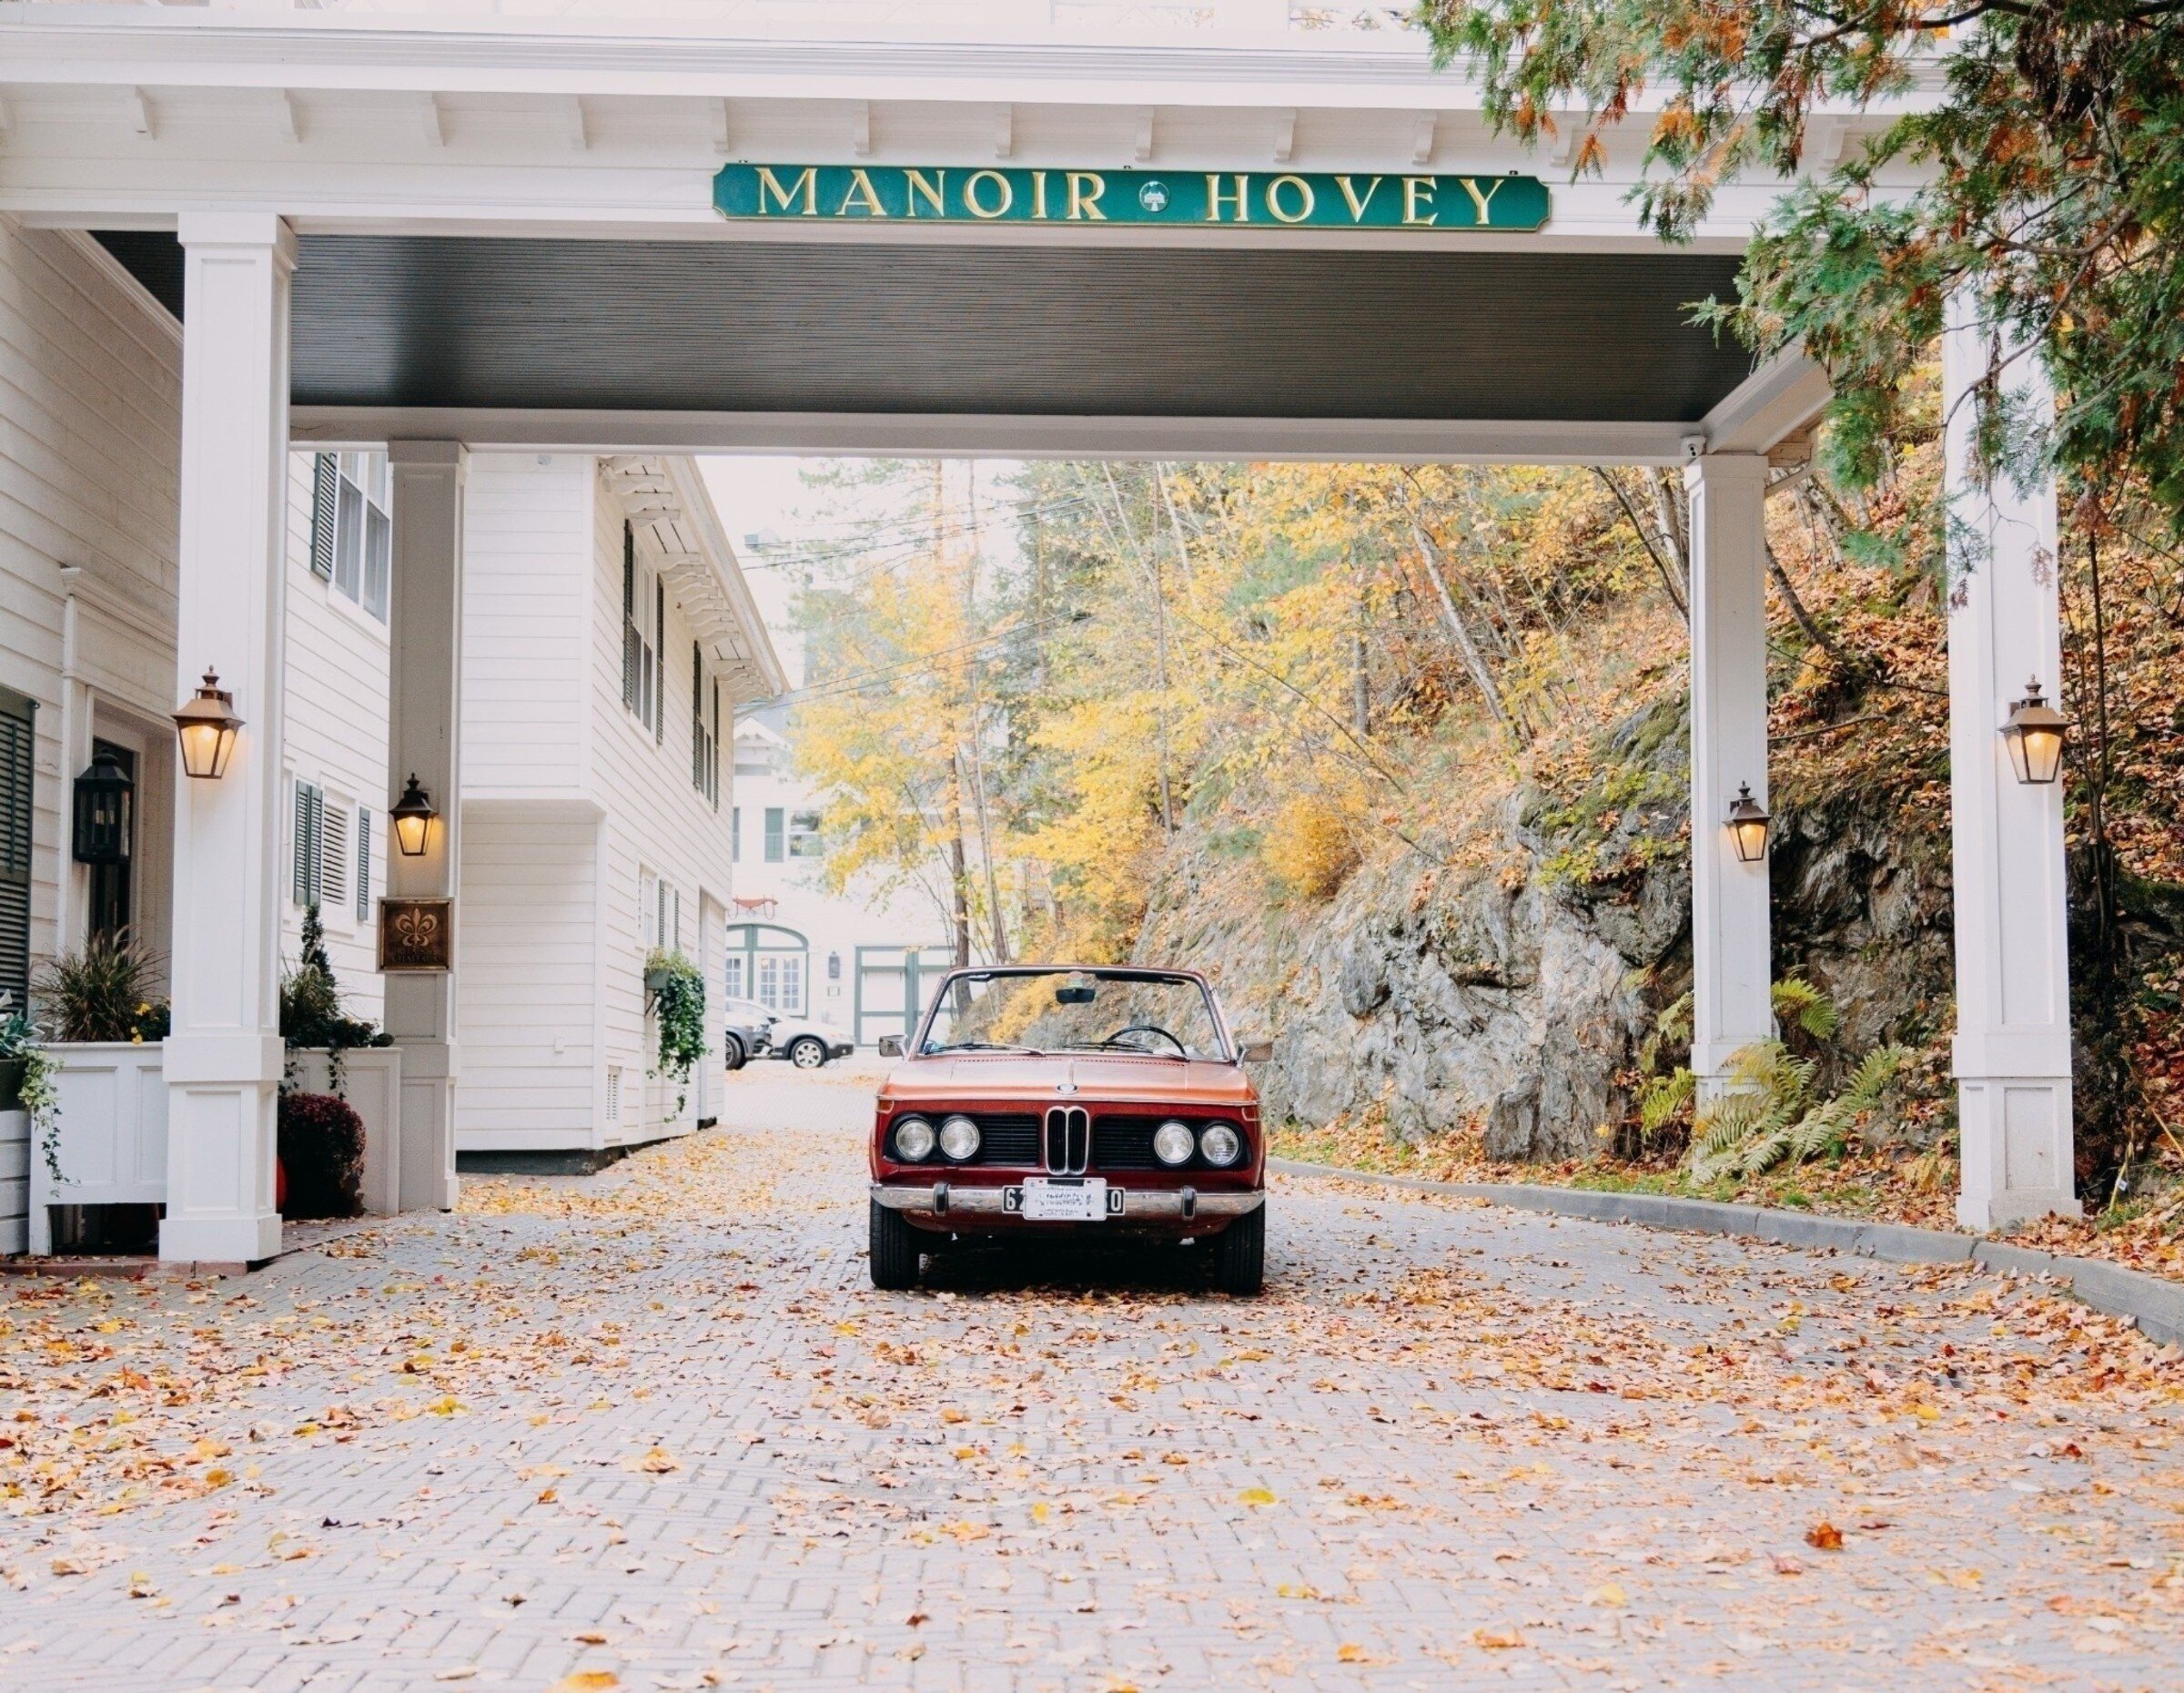 A car parked by the entrance of the Manor